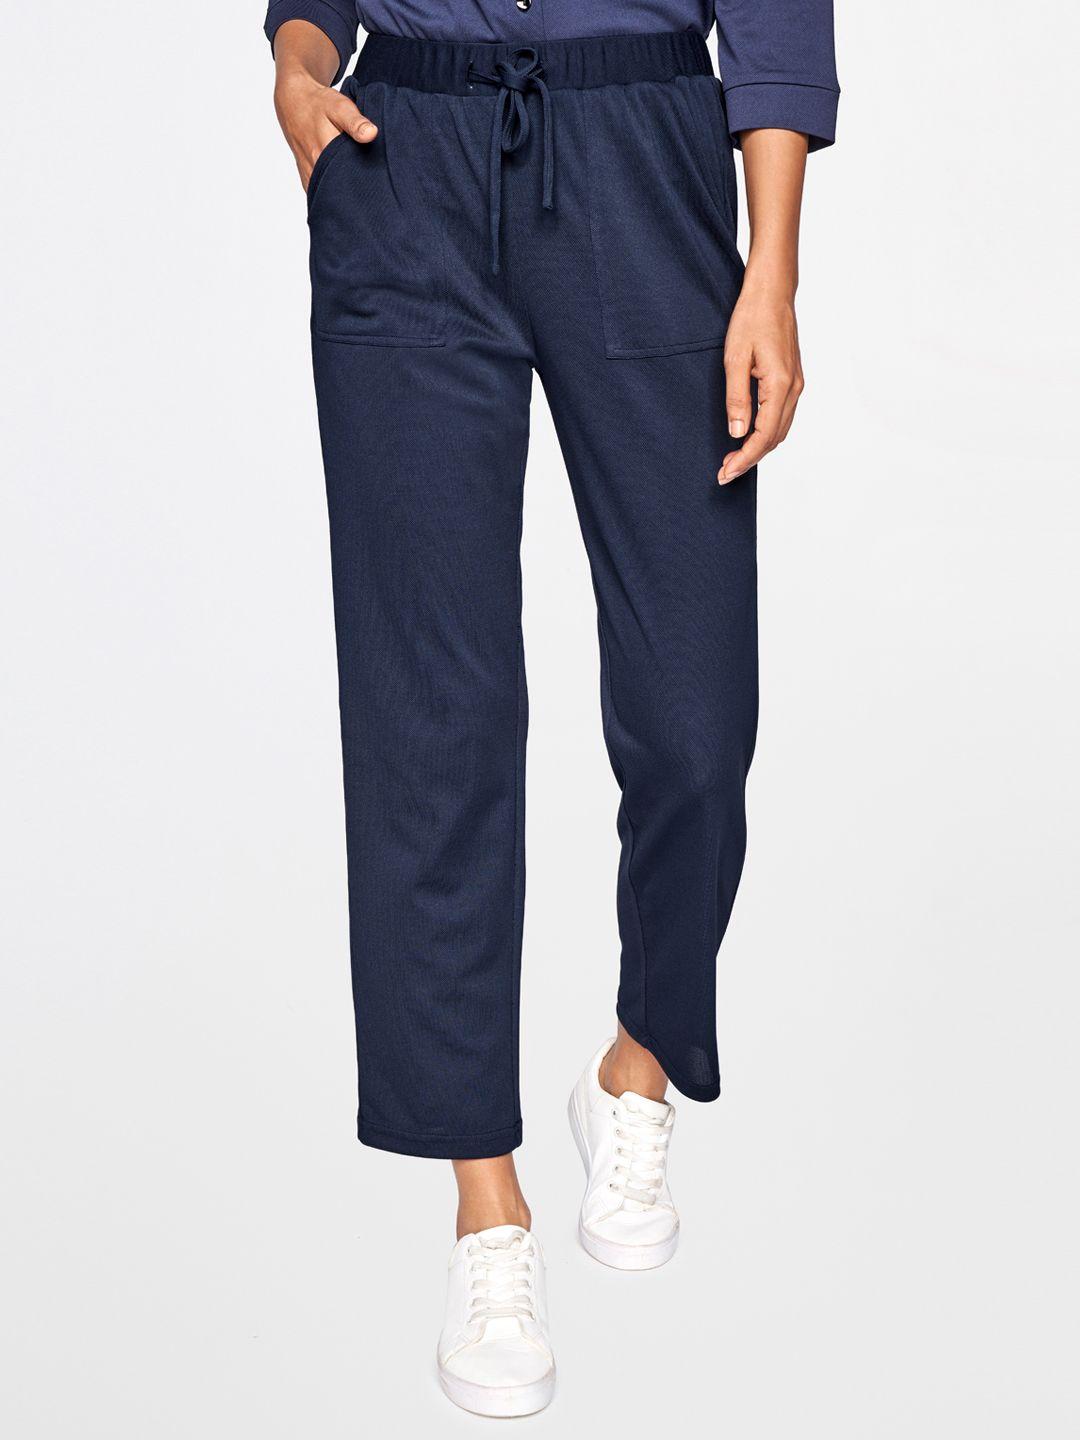 and-women-navy-blue-tapered-fit-high-rise-trousers